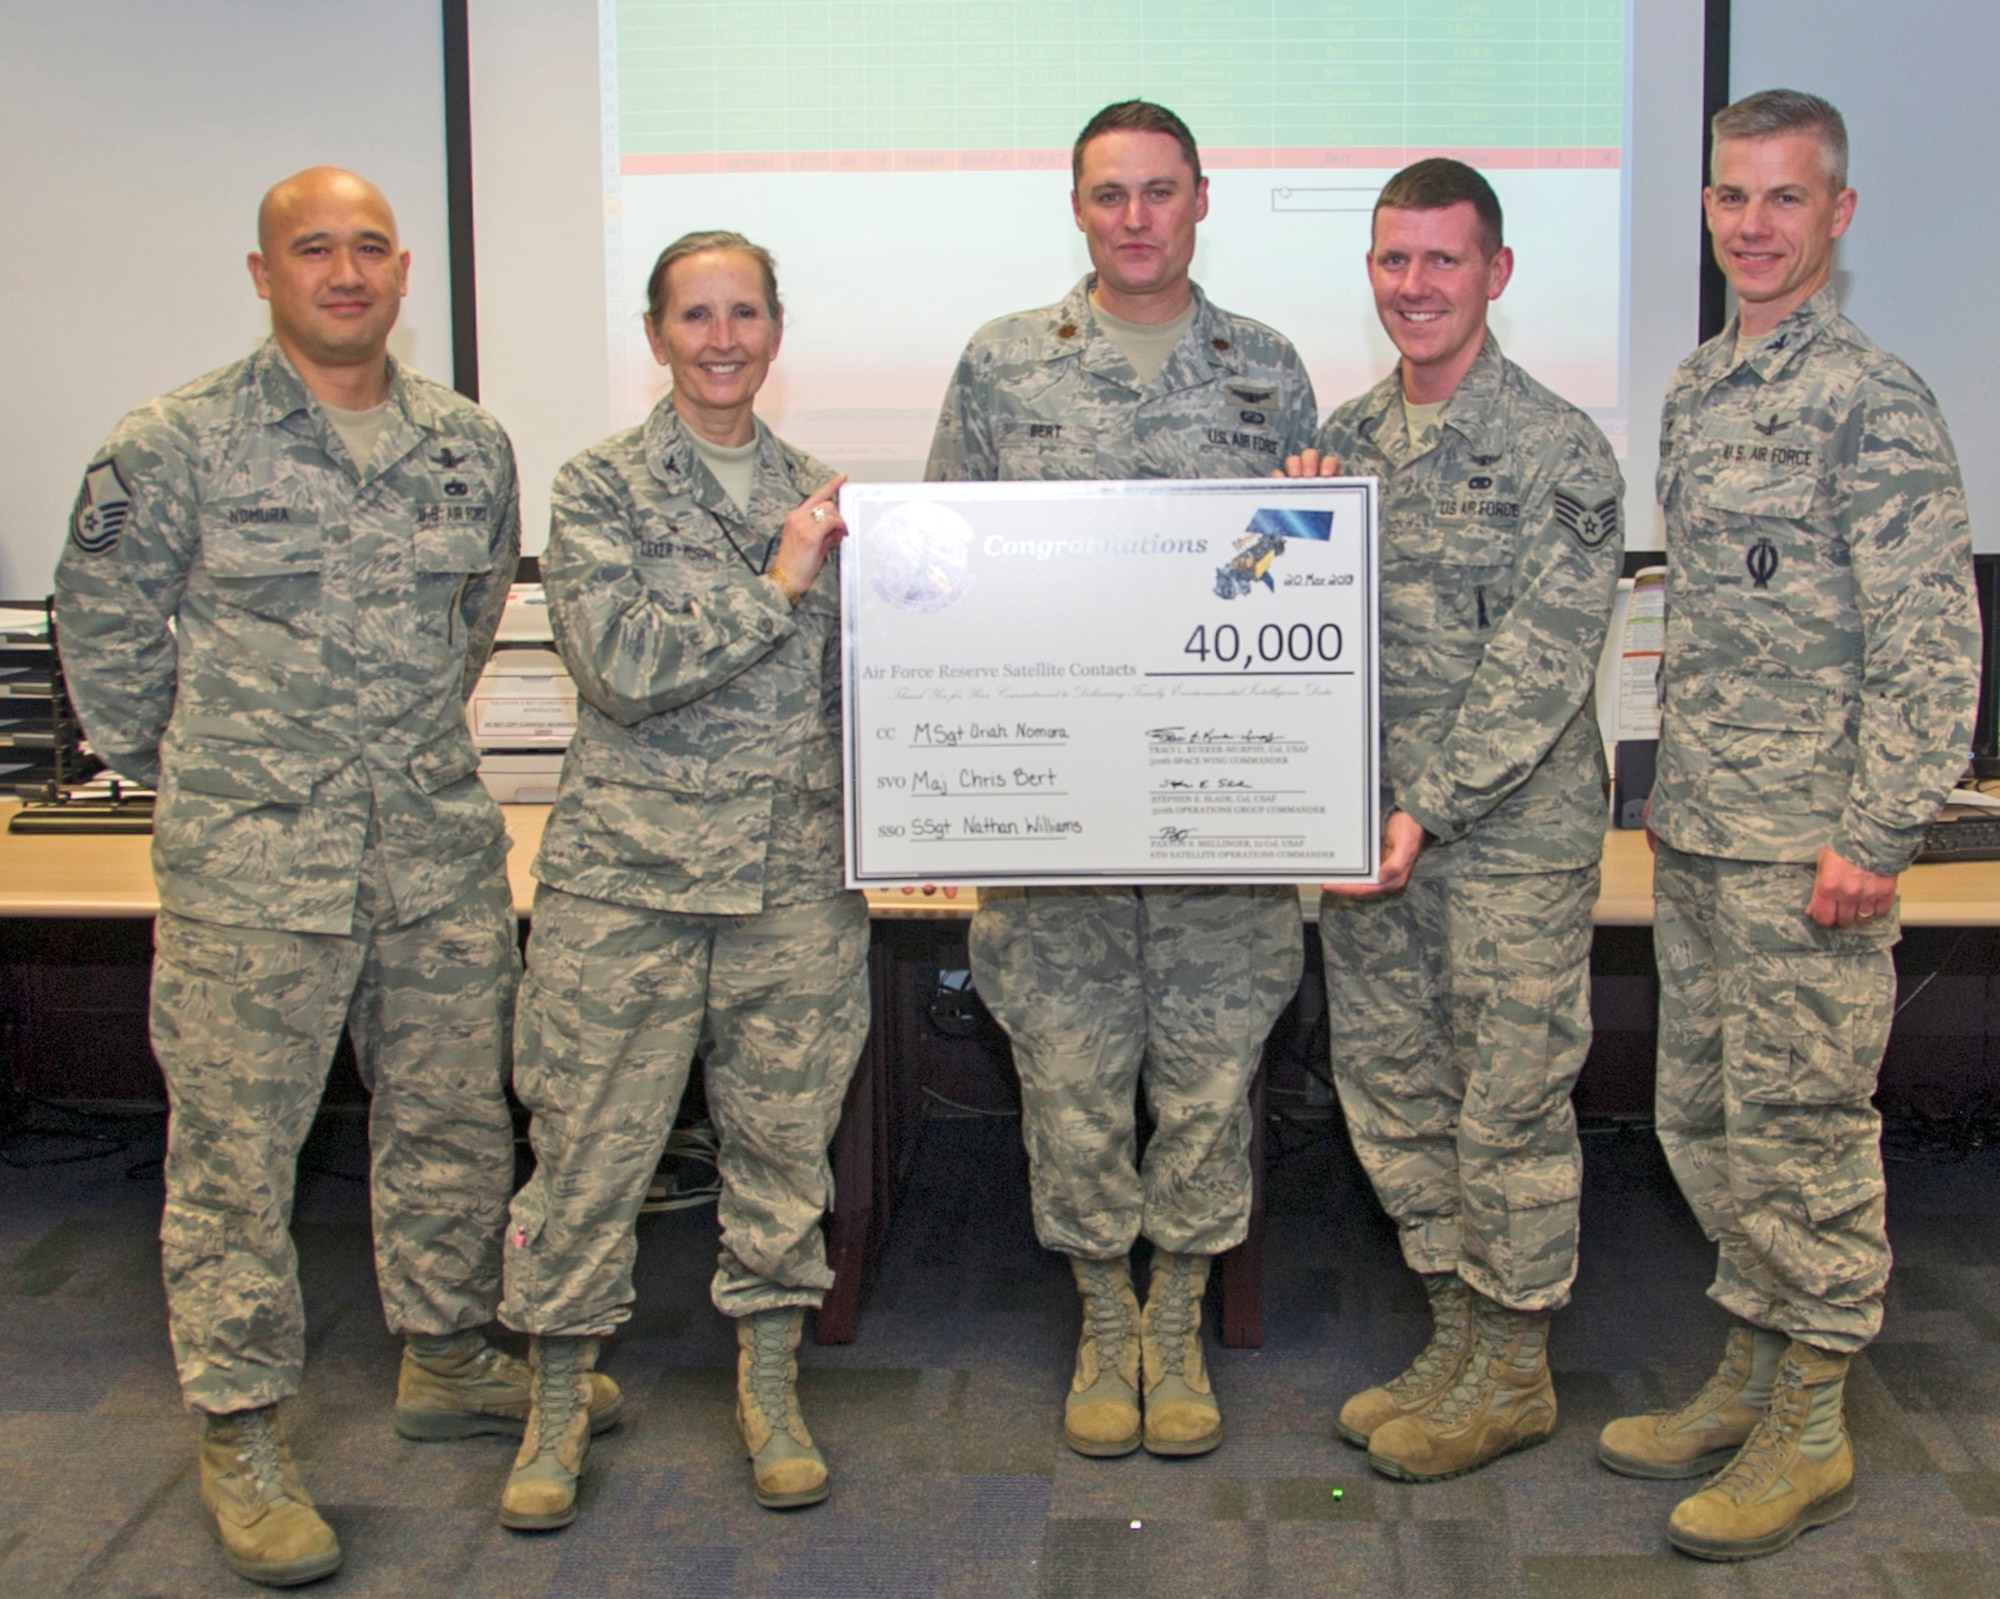 Col. Traci Kueker-Murphy, 310th Space Wing commander, and Col. Stephen Slade, 310th Operations Group commander, present members of the 6th Space Operations Squadron with a celebratory "check" to mark their completion of the squadron's 40,000th satellite contact on Tuesday, Mar. 20, 2018.